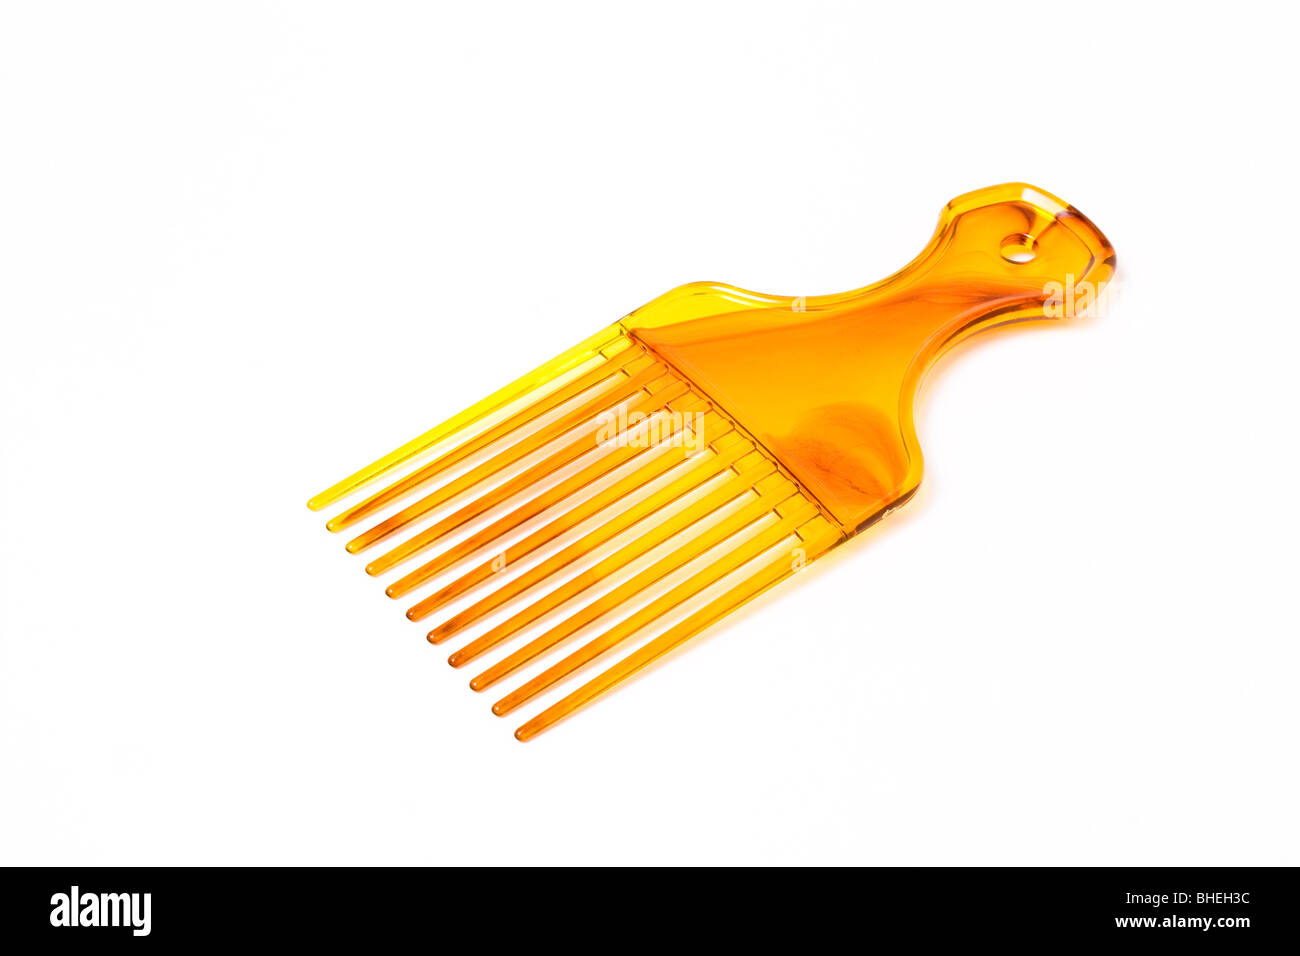 Wide plastic afro comb from low viewpoint isolated against white background. Stock Photo